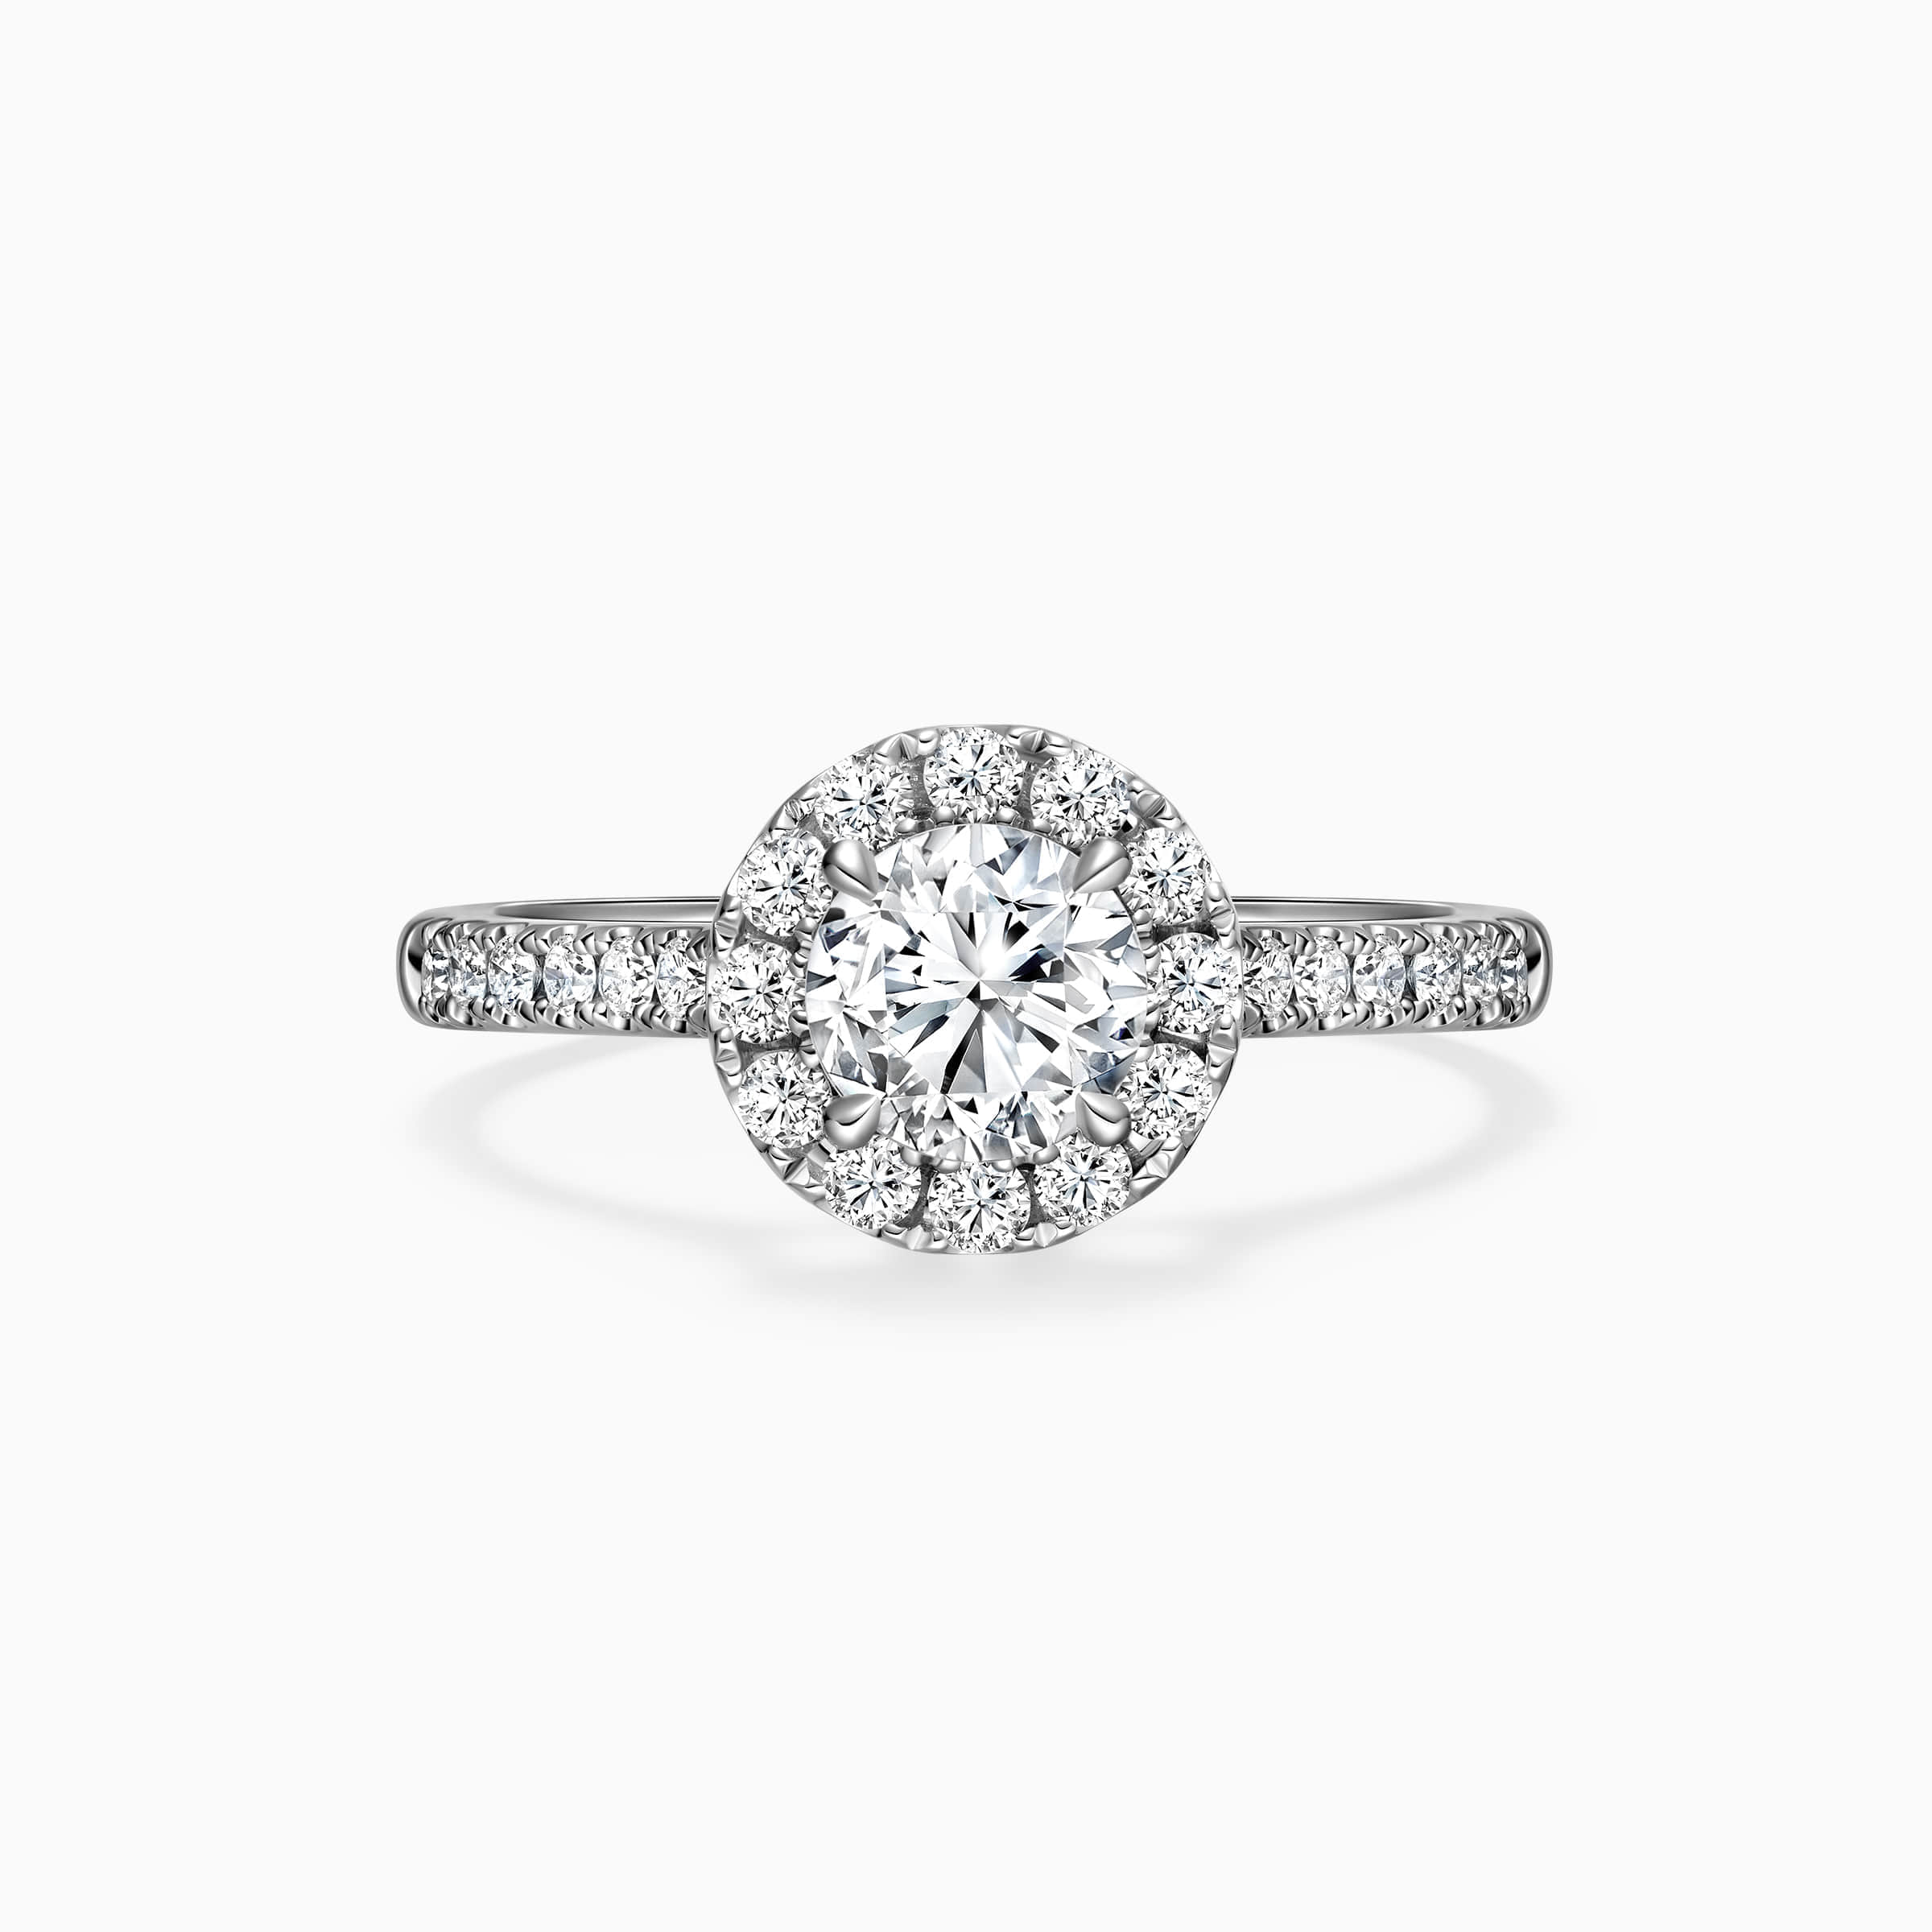 Darry Ring round halo engagement ring